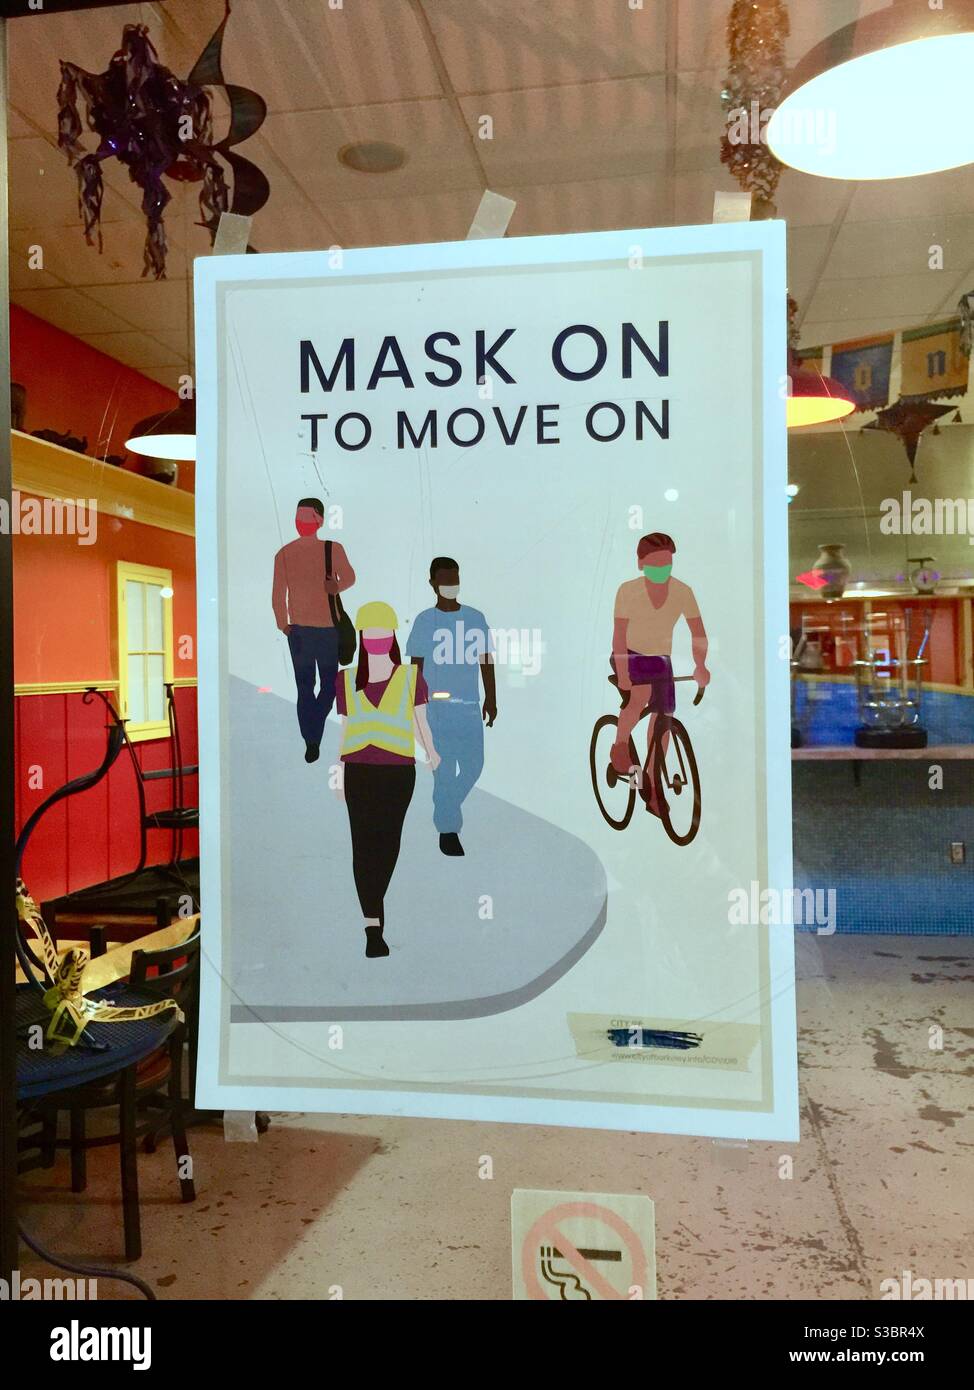 A sign at small restaurant that says “Mask On To Move On”. Practice safety and wear a mask to prevent COVID spread and infection. Stock Photo